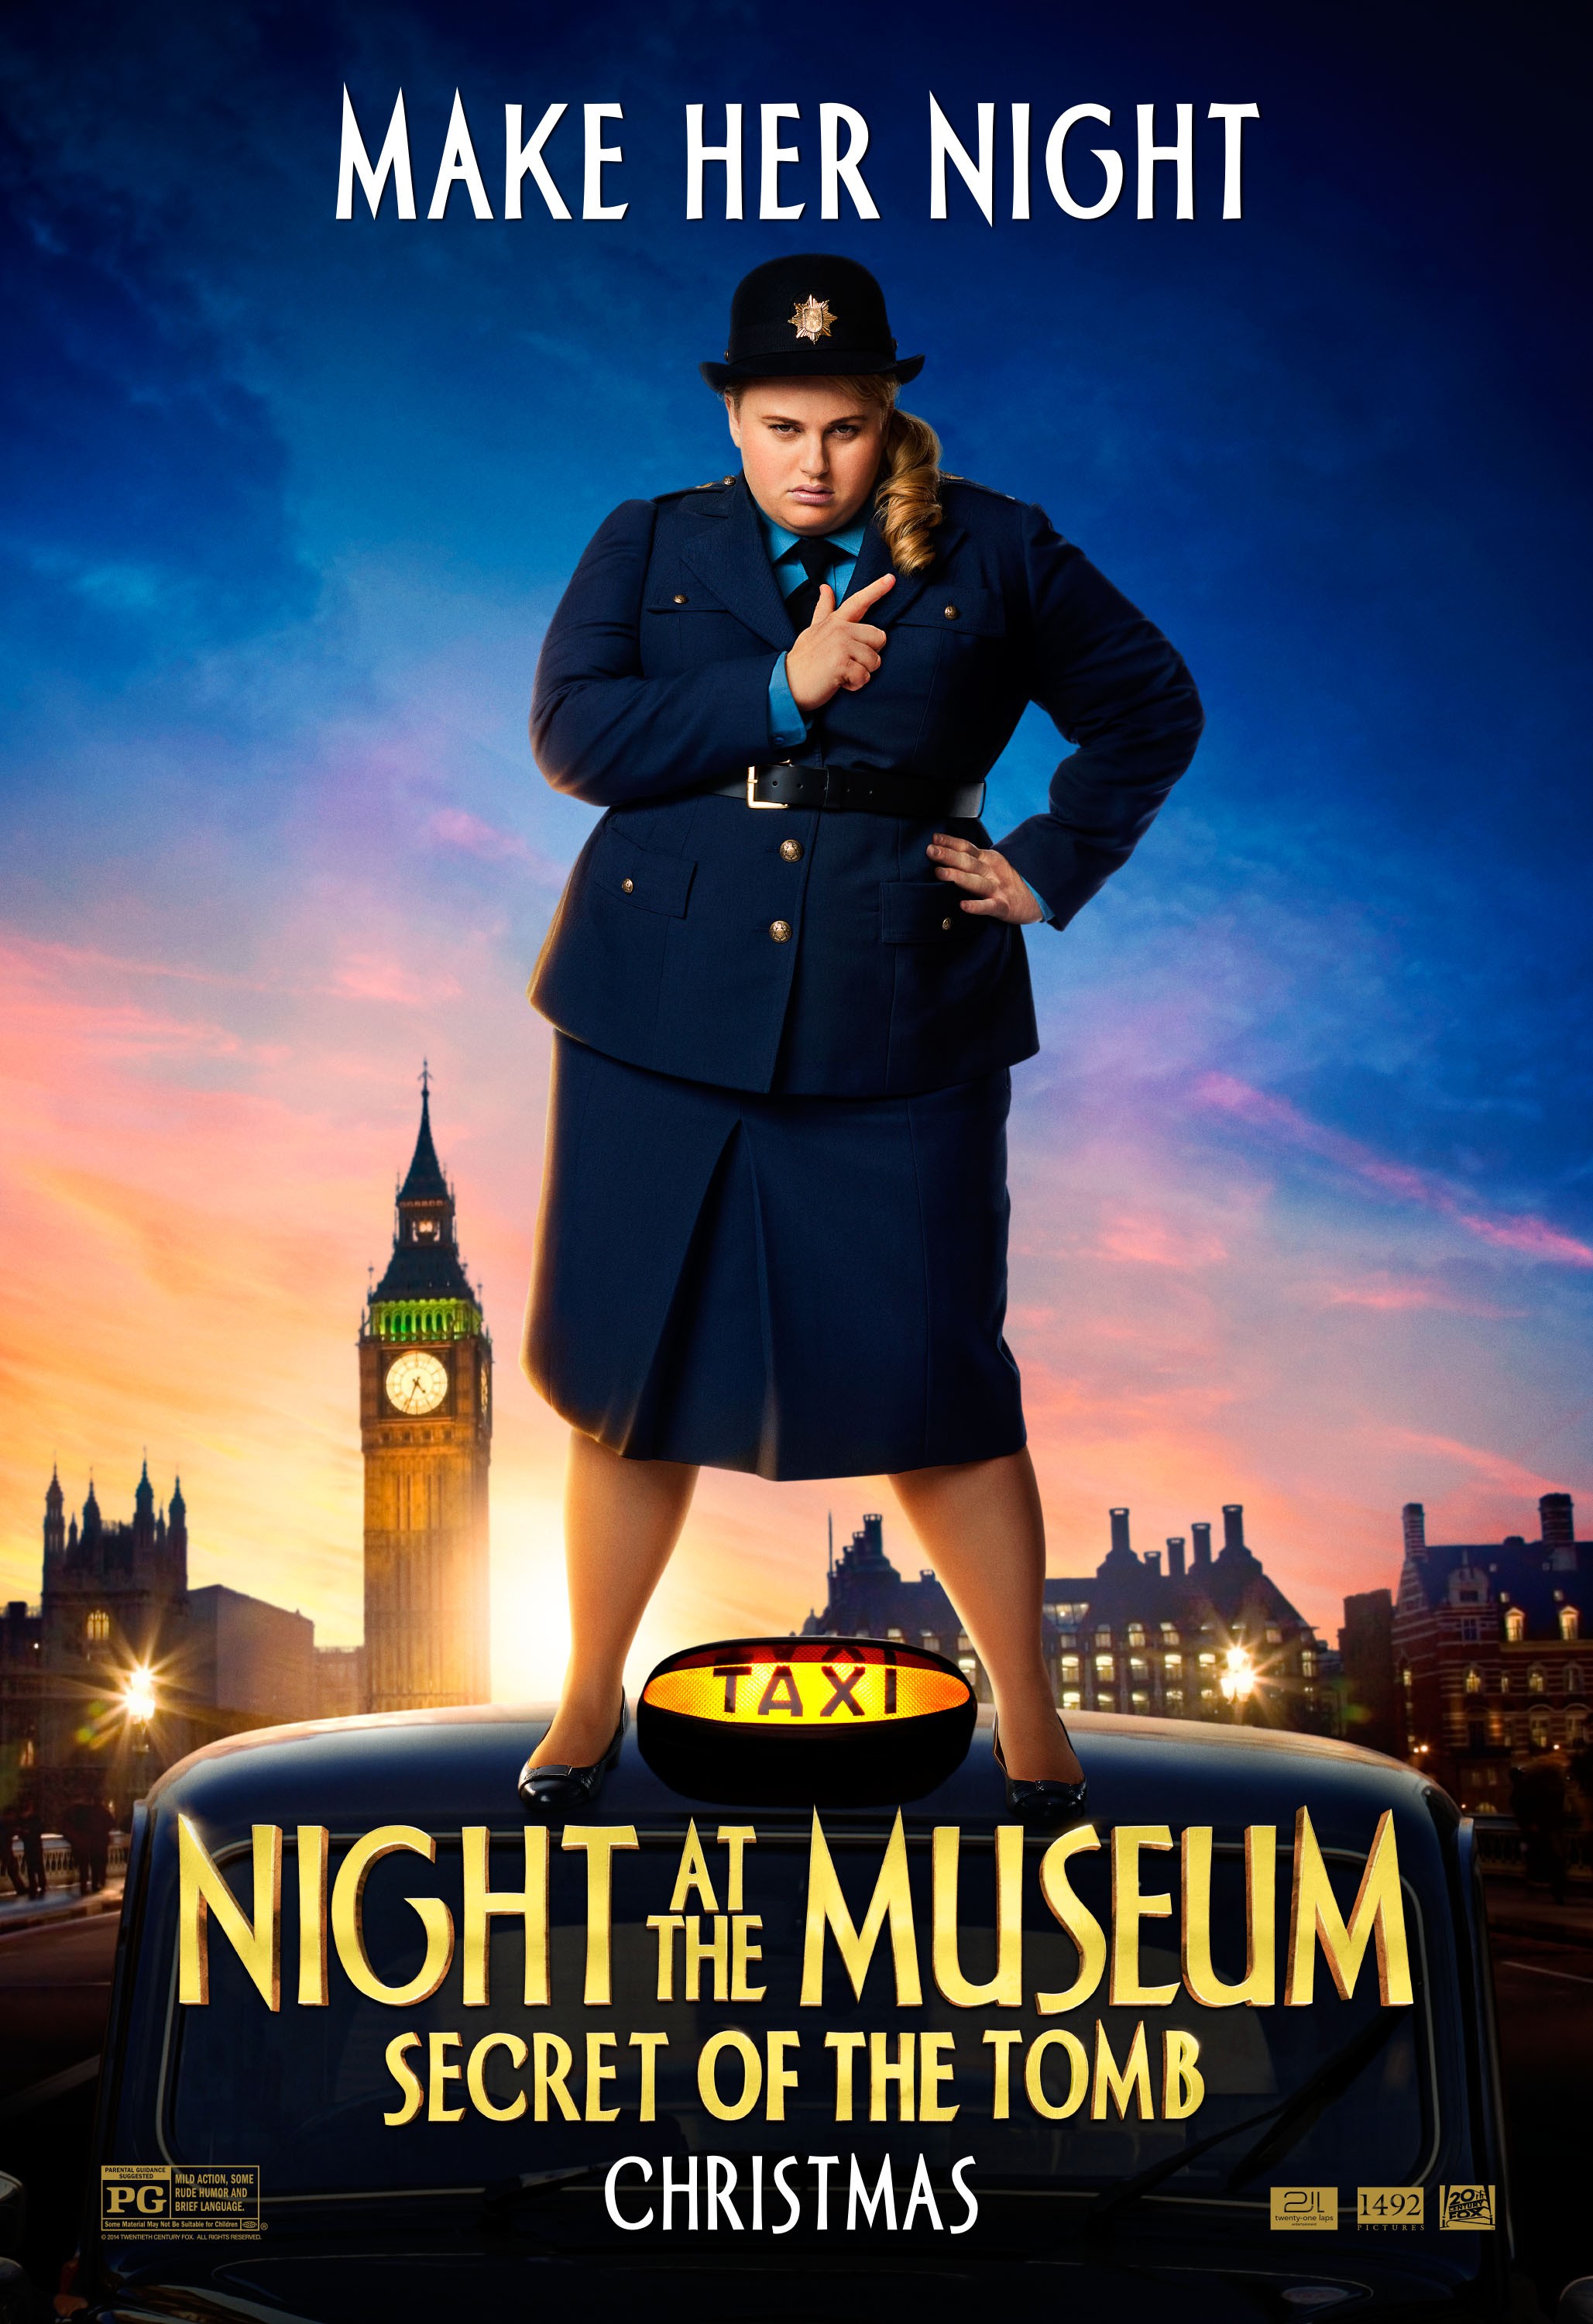 Mega Sized Movie Poster Image for Night at the Museum: Secret of the Tomb (#16 of 21)